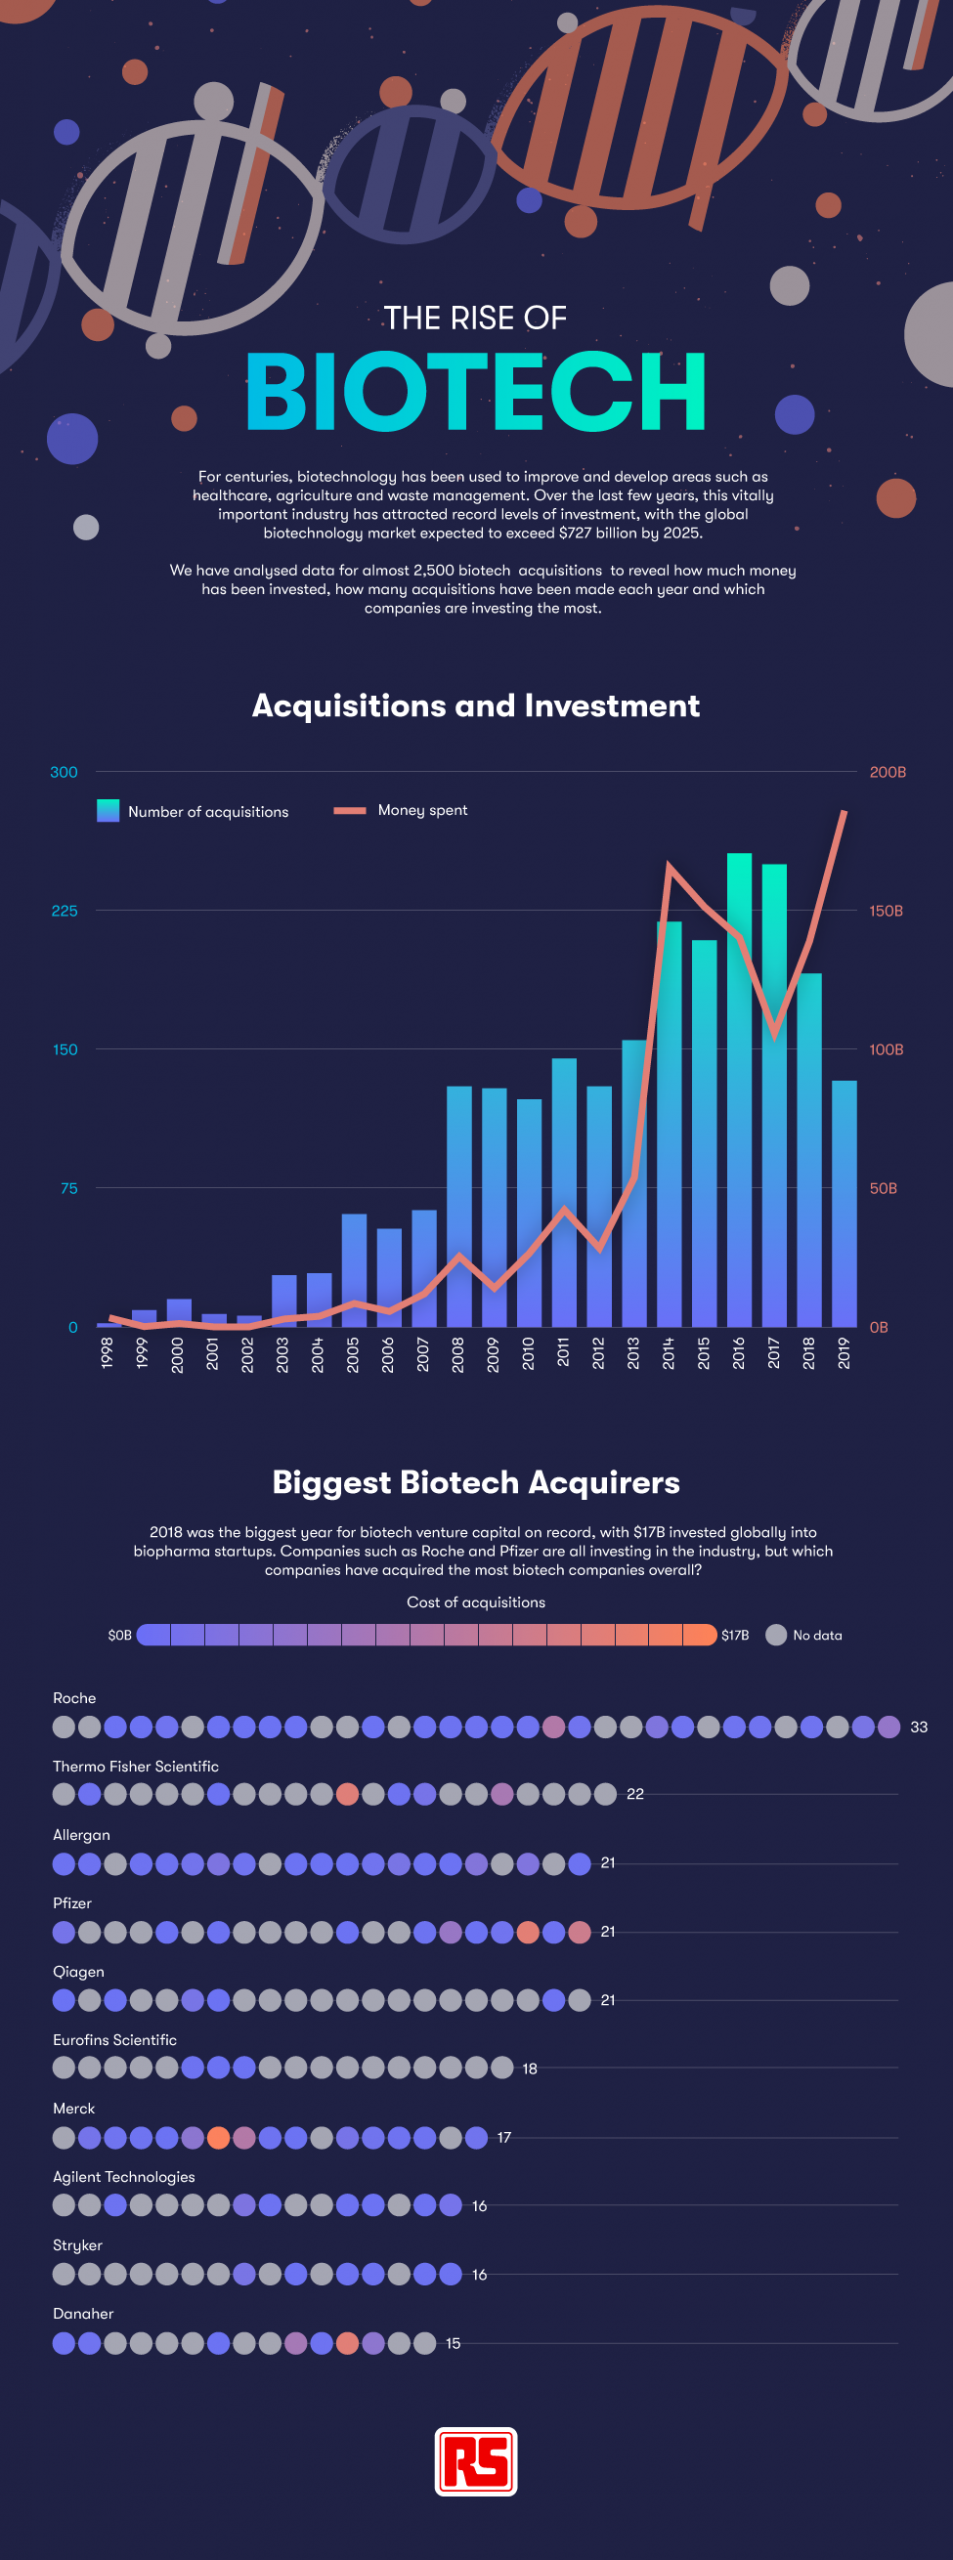 The Rise of Biotech Infographic